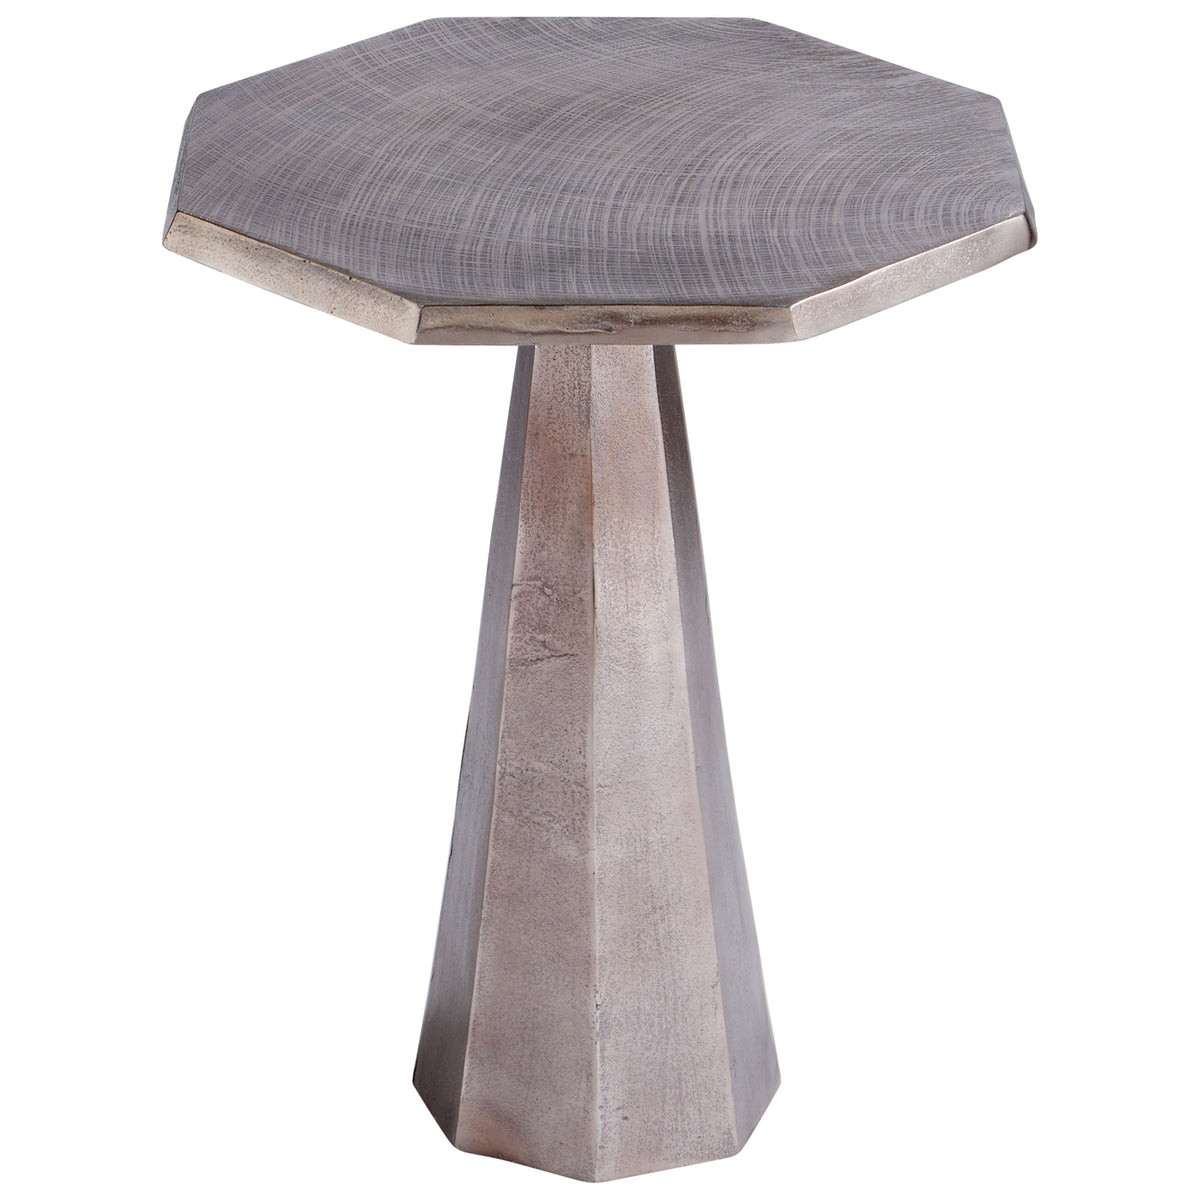 Armon SIde Table by Cyan